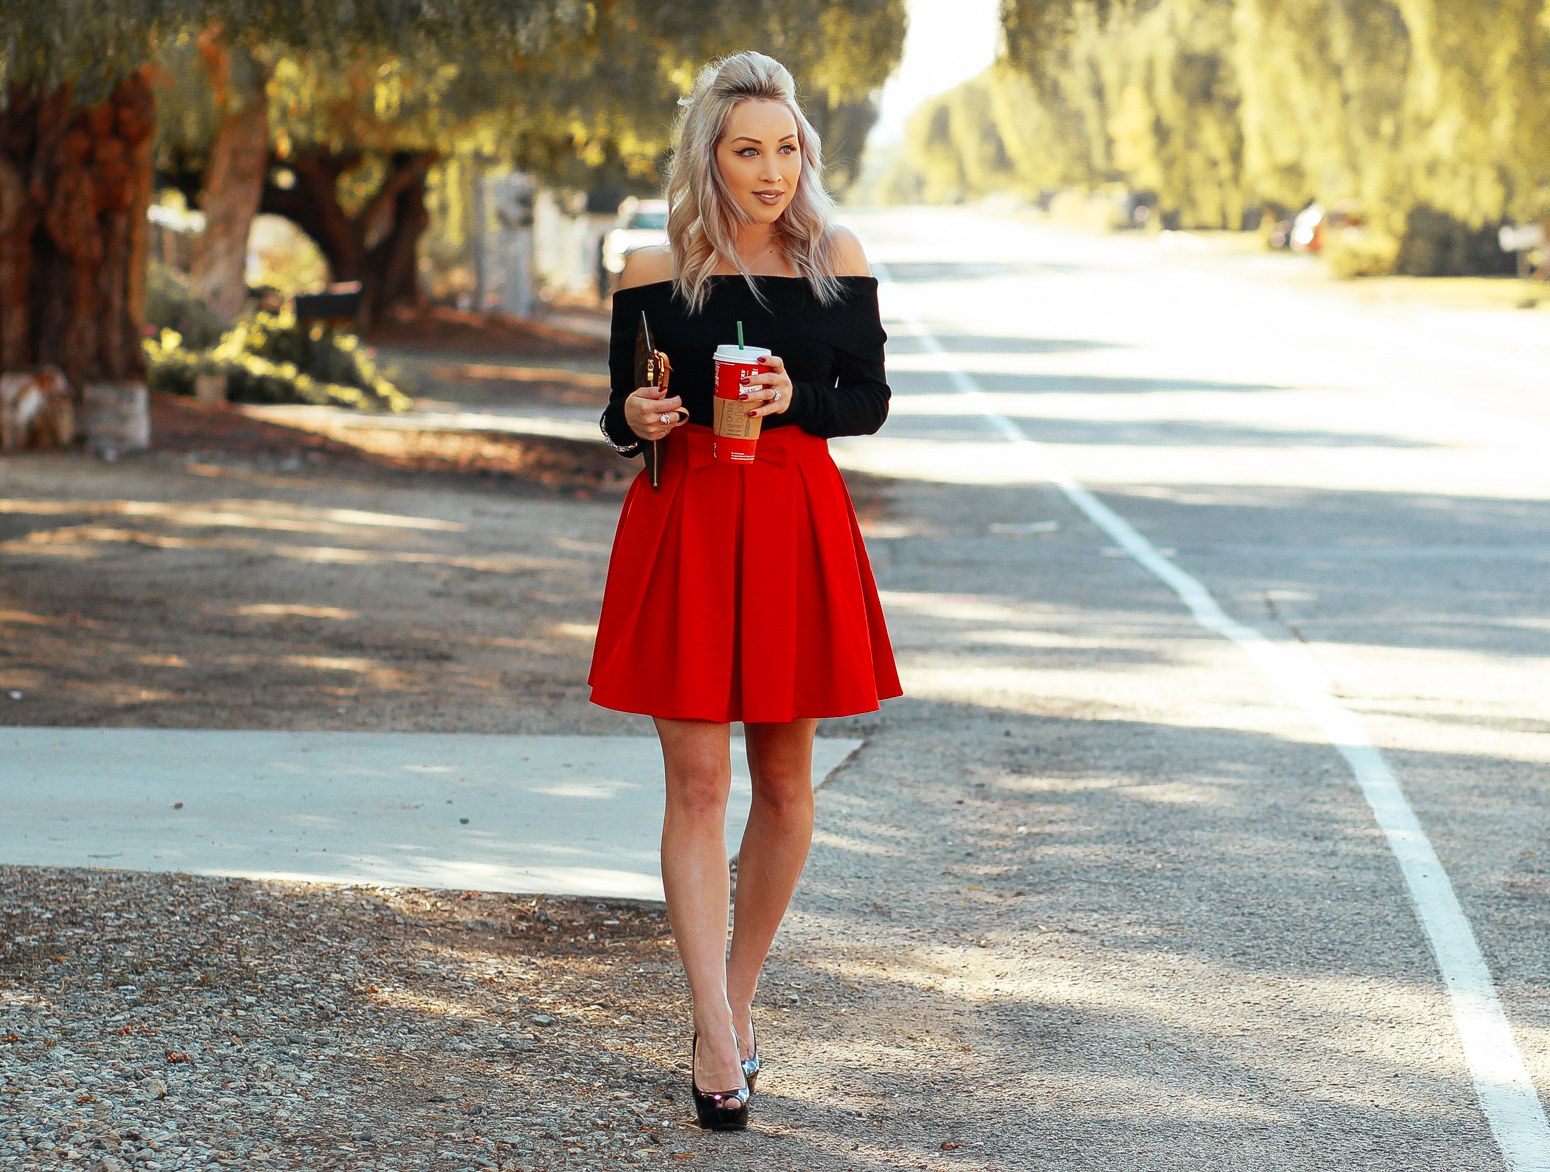 Blondie in the City | Red Holiday Skirt, Holiday Outfit Inspo